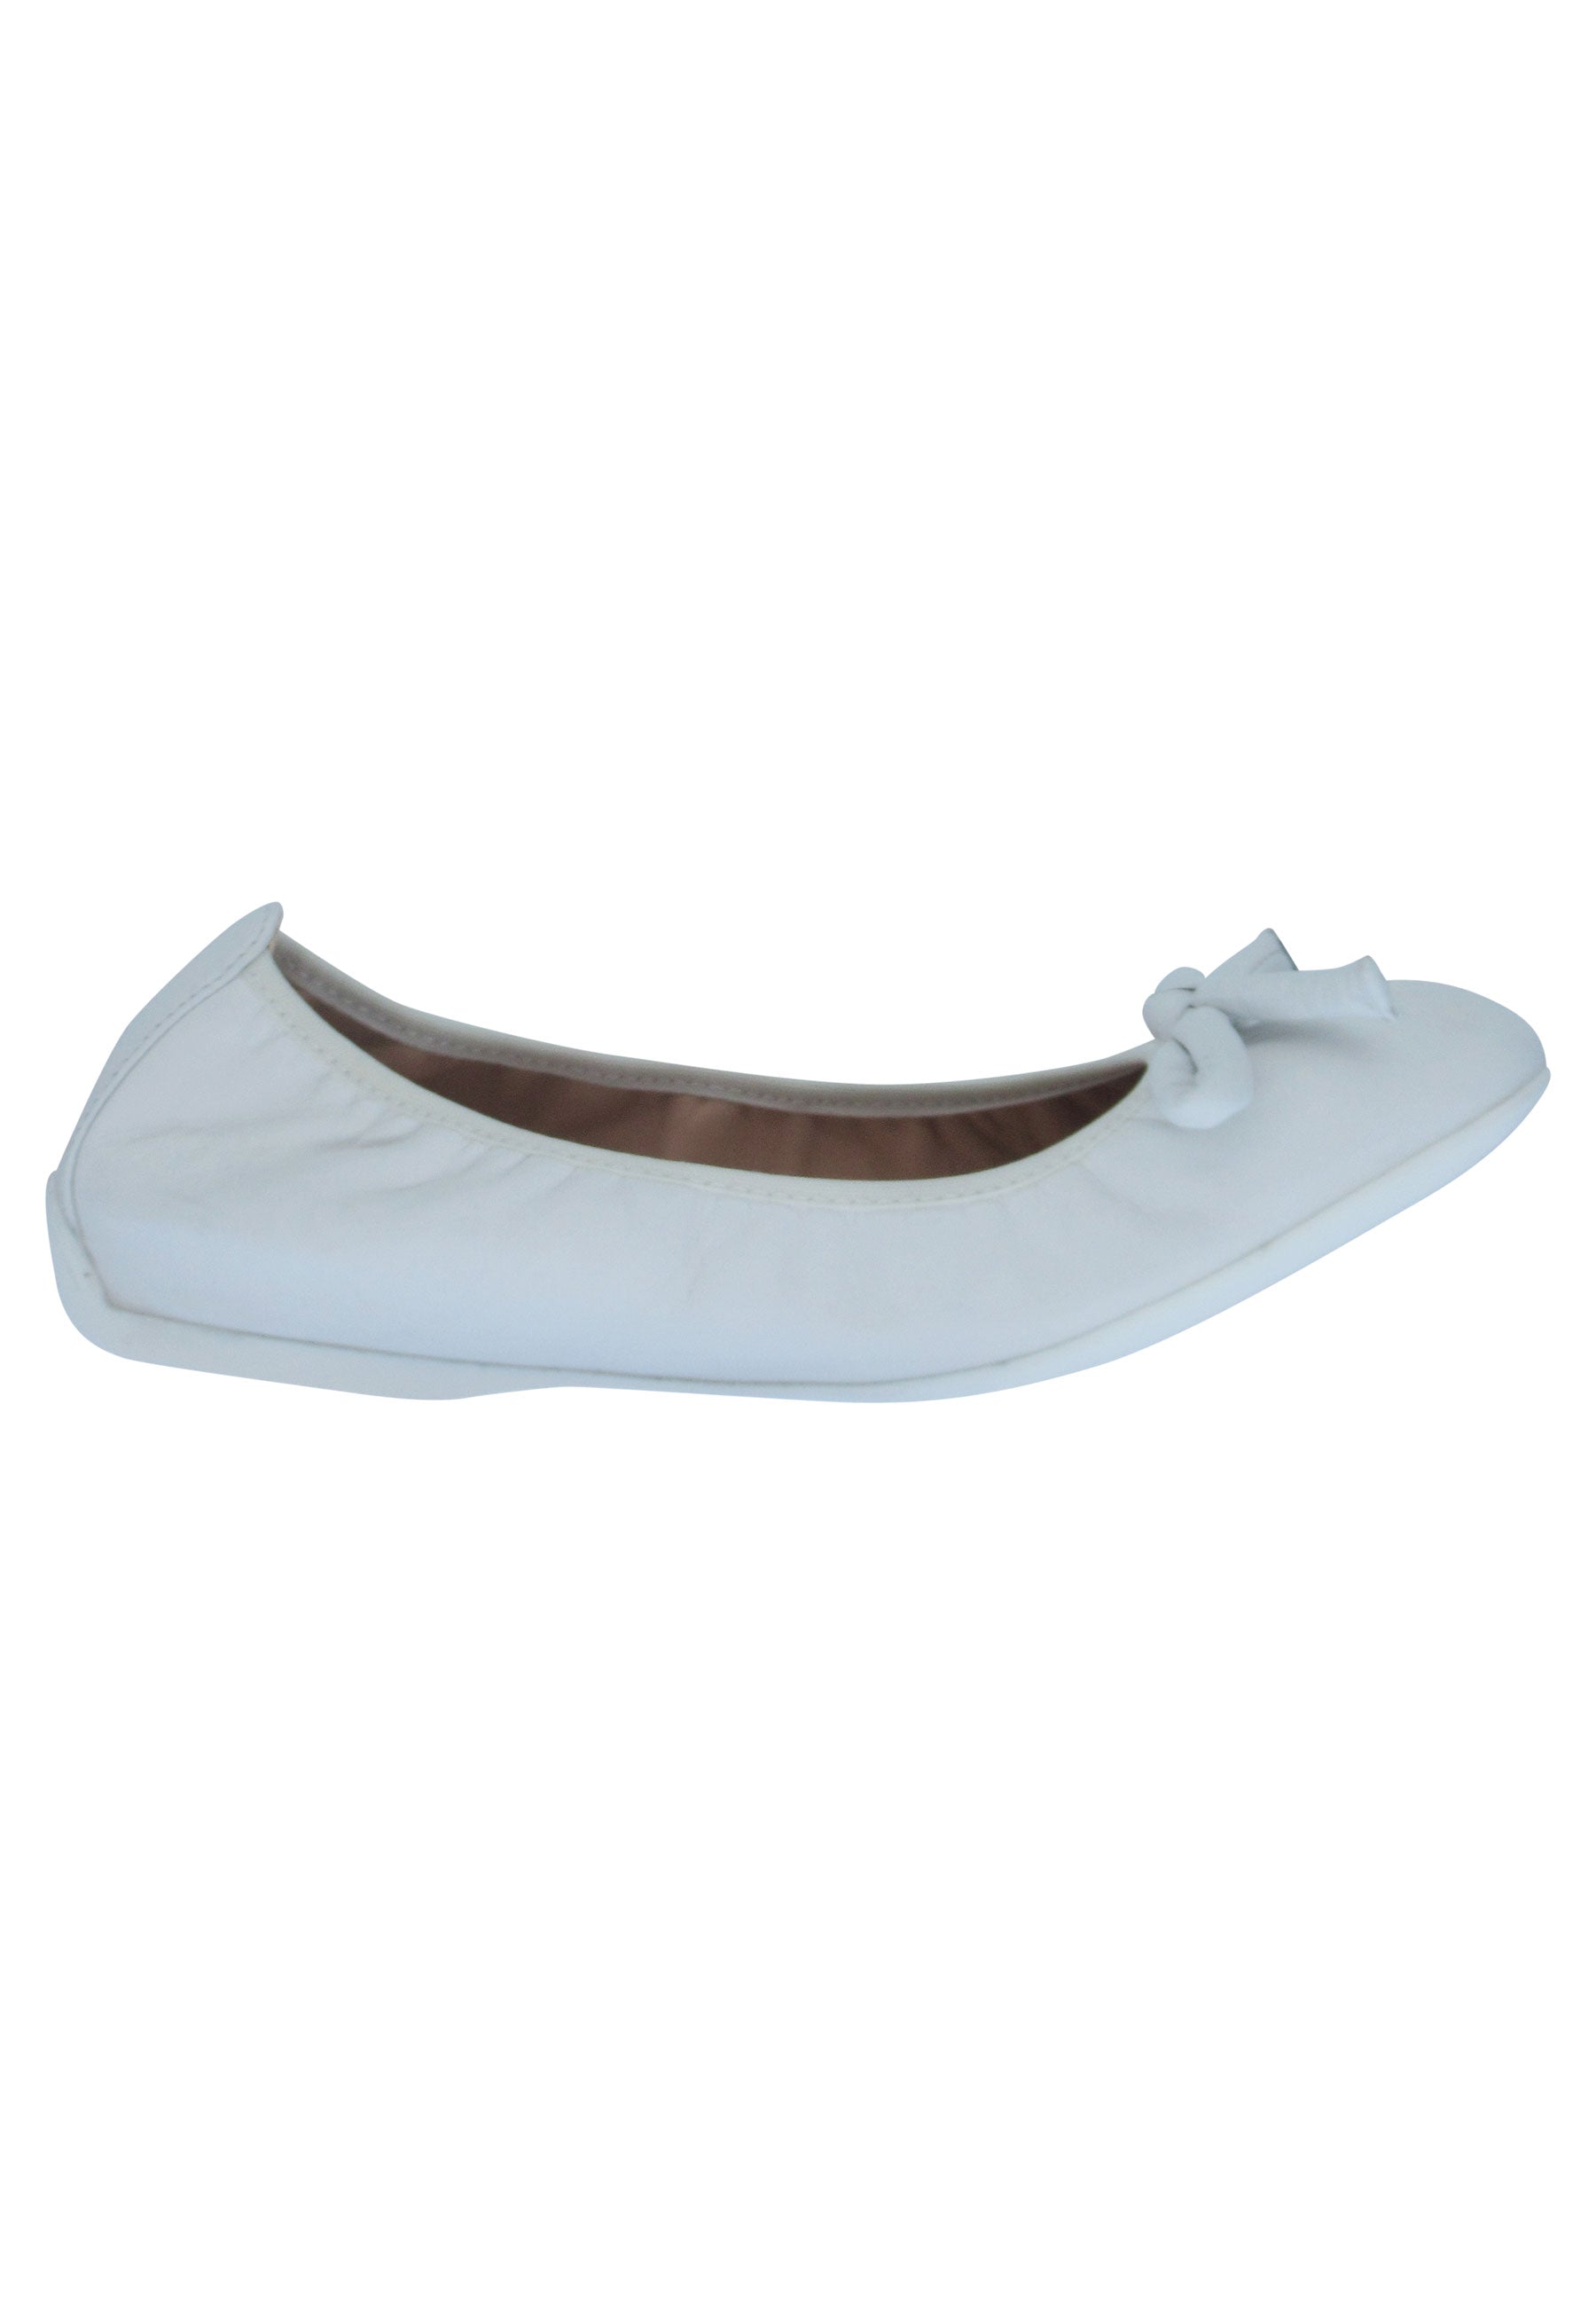 Aleda women's ballet flats in white leather and low rubber sole